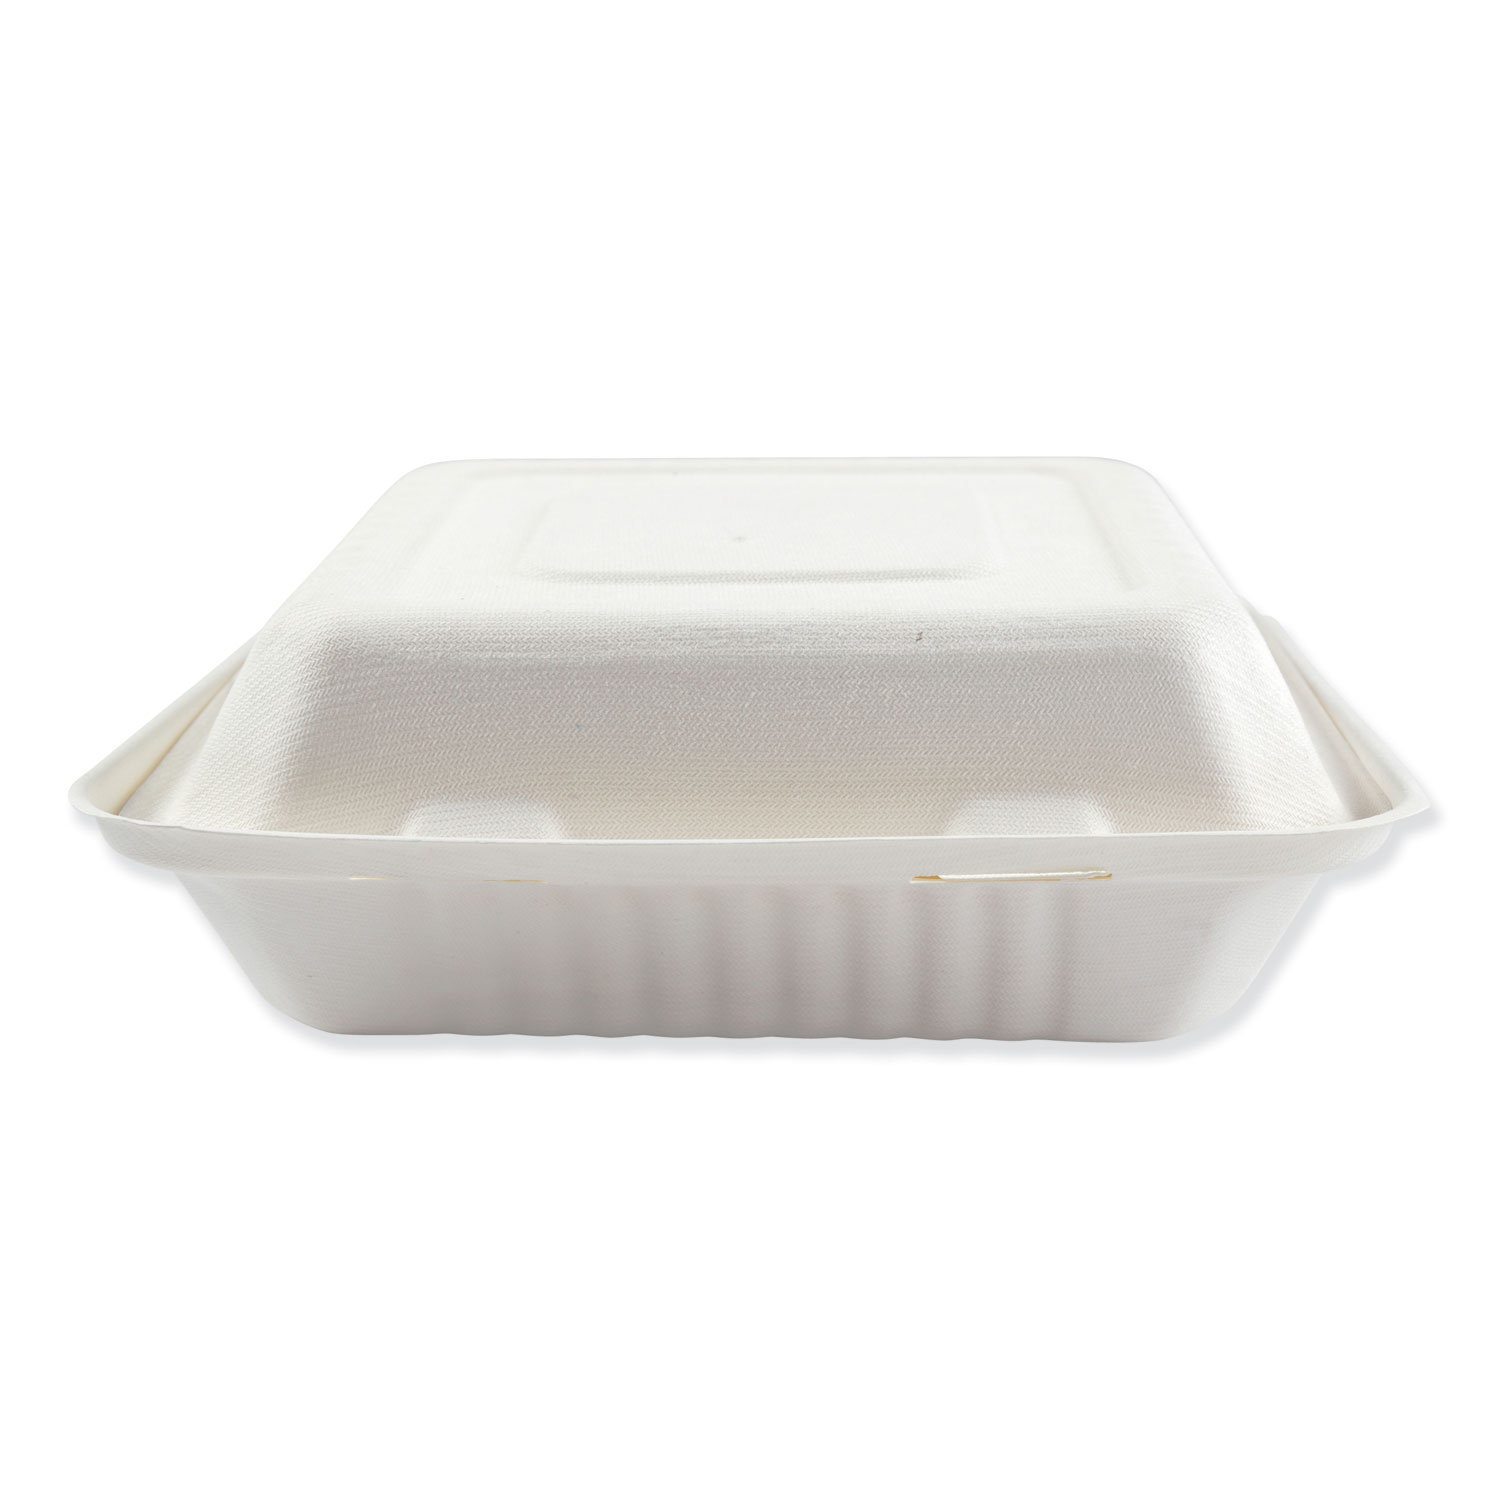  Boardwalk BWKHINGEWF3CM9 Bagasse Molded Fiber Food Containers, Hinged-Lid, 3-Compartment 9 x 9, White, 100/Sleeve, 2 Sleeves/Carton (BWKHINGEWF3CM9) 